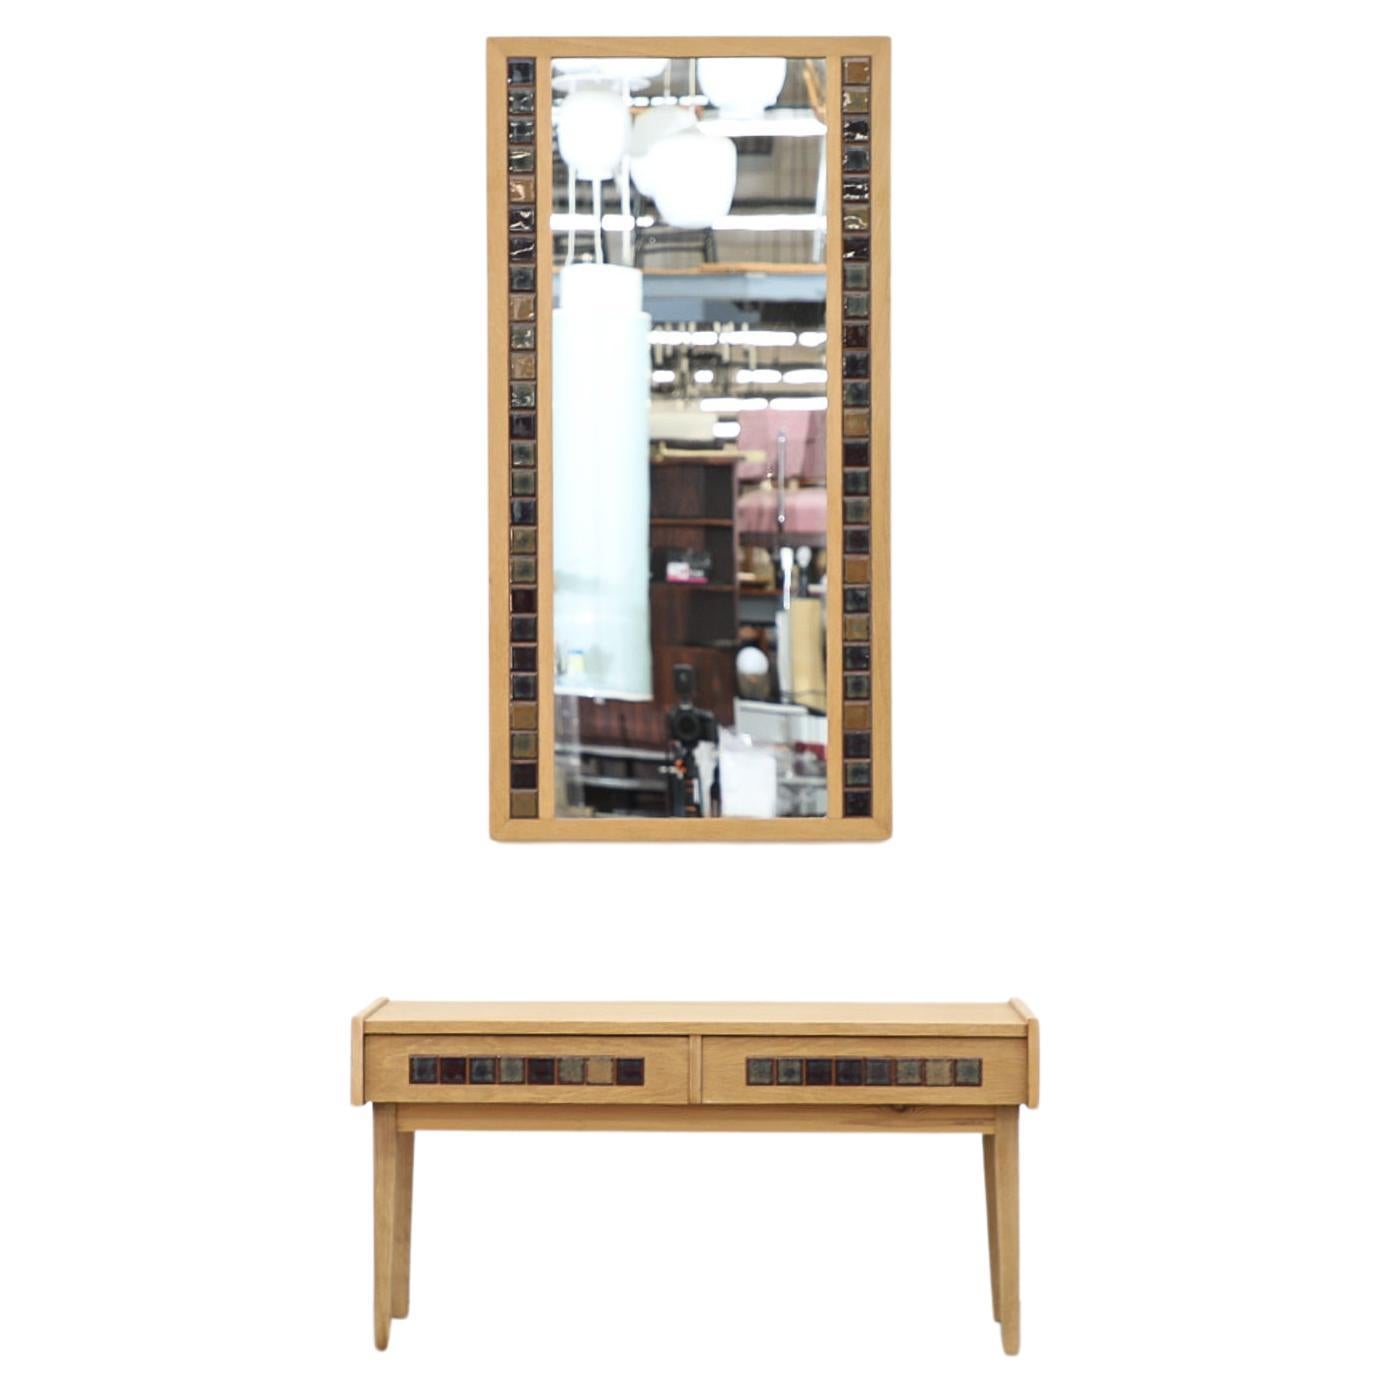 Danish Mid-Century oak and ceramic tile wall mount mirror designed by Erik Kjerkegaard. In original condition with normal wear for its age and use.  Shown with matching little cabinet (LU922431700672) listed separately.